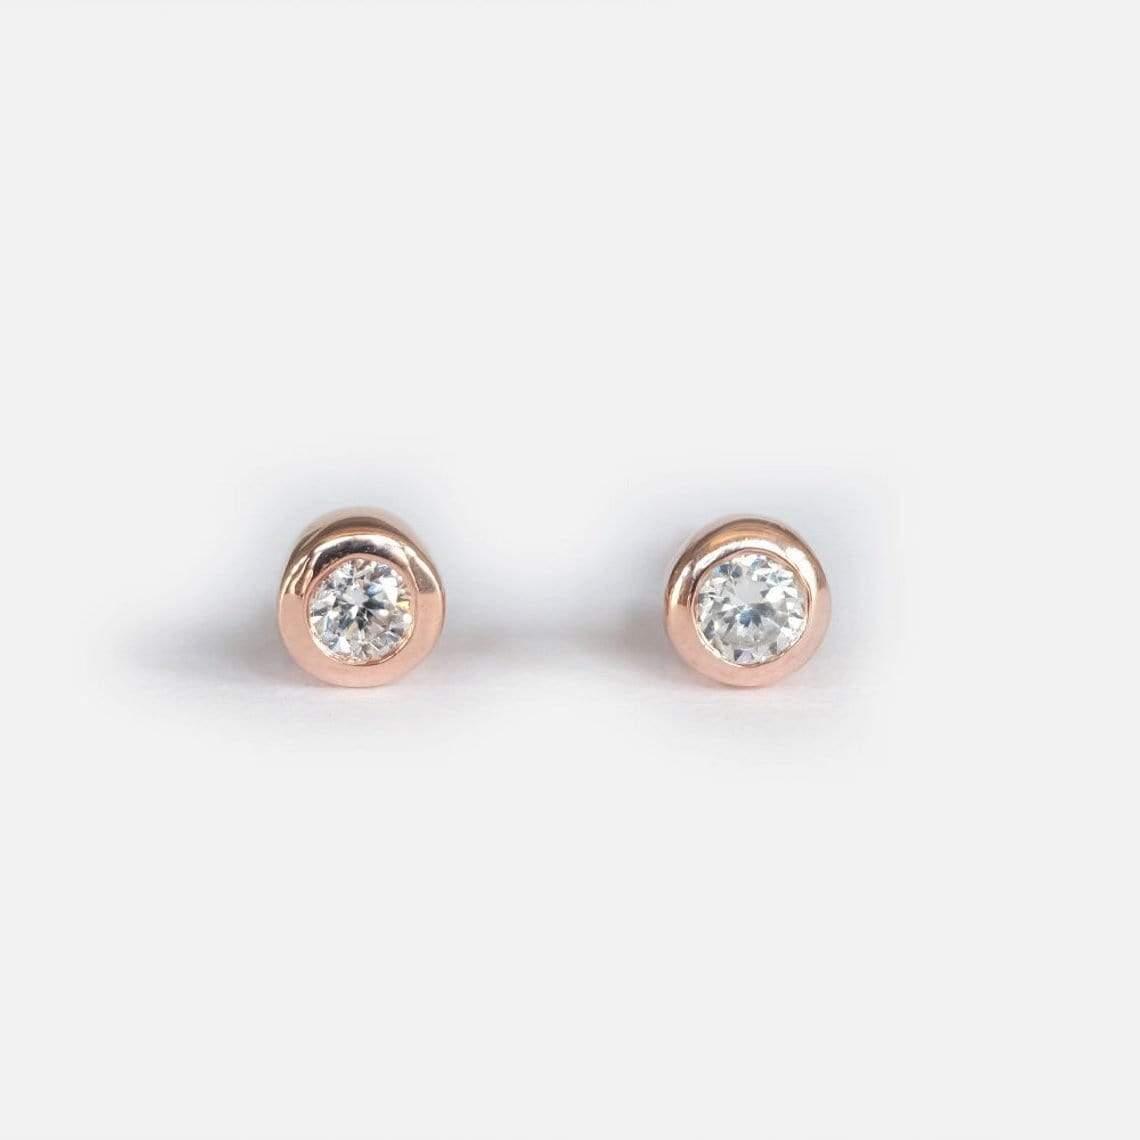 0.10 Carats 14k Solid Rose Gold Diamond Earrings - SOVATS